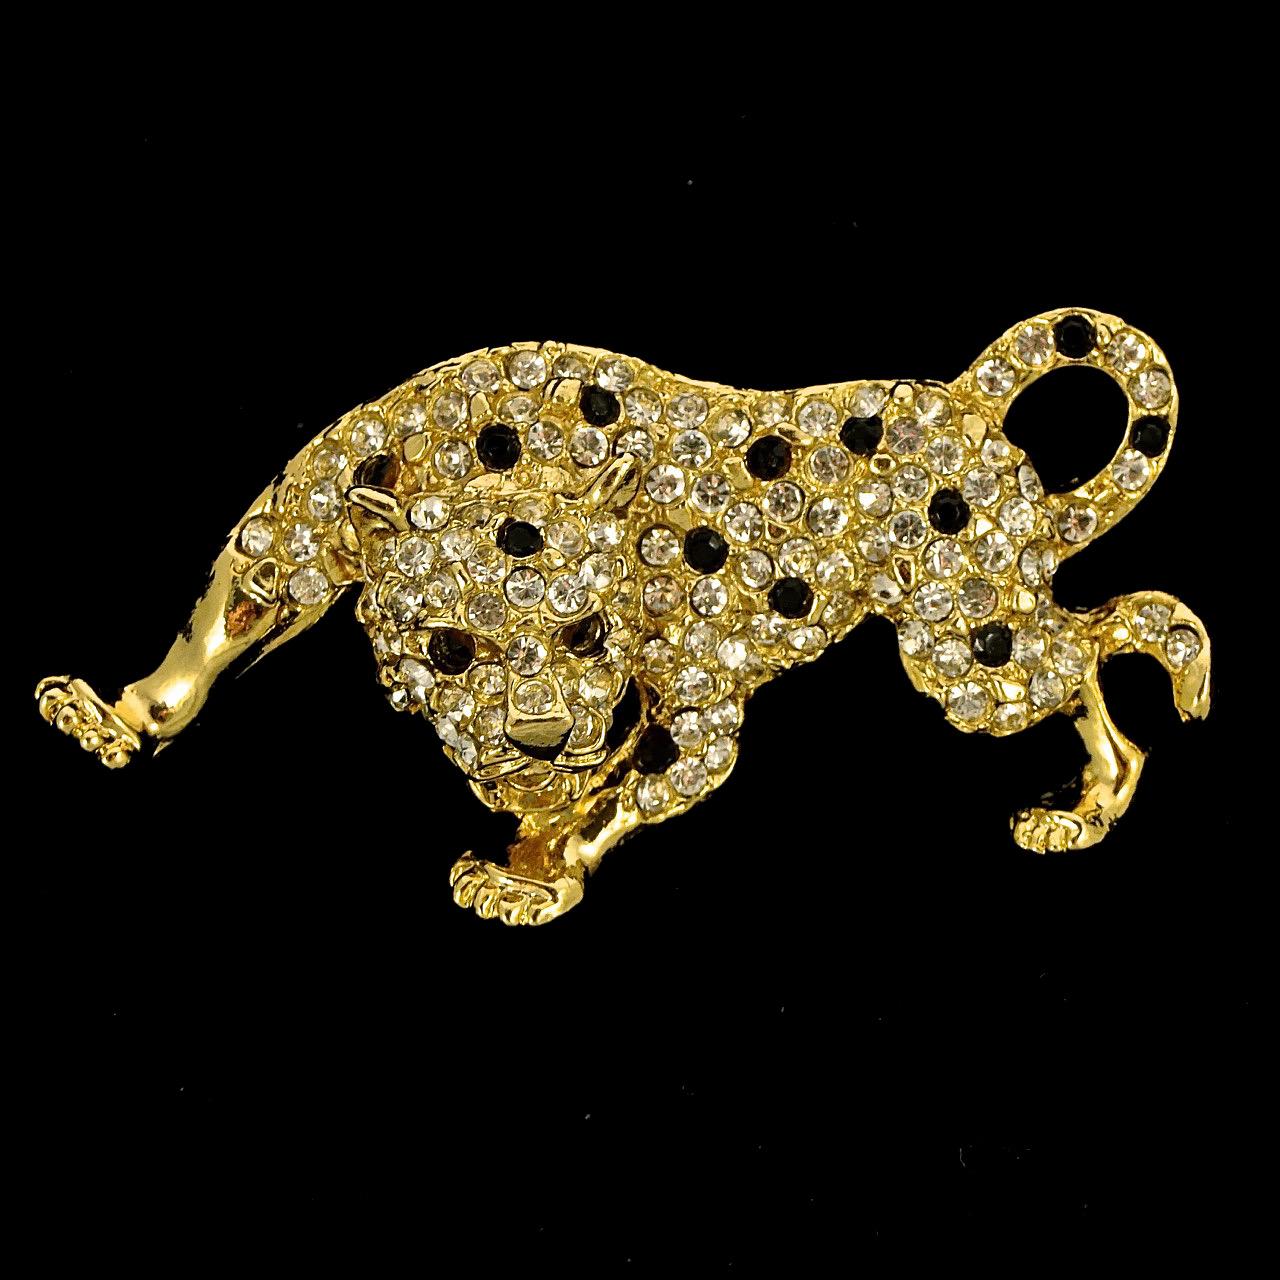 Gold Plated Leopard Brooch with Clear and Black Rhinestones circa 1980s For Sale 2